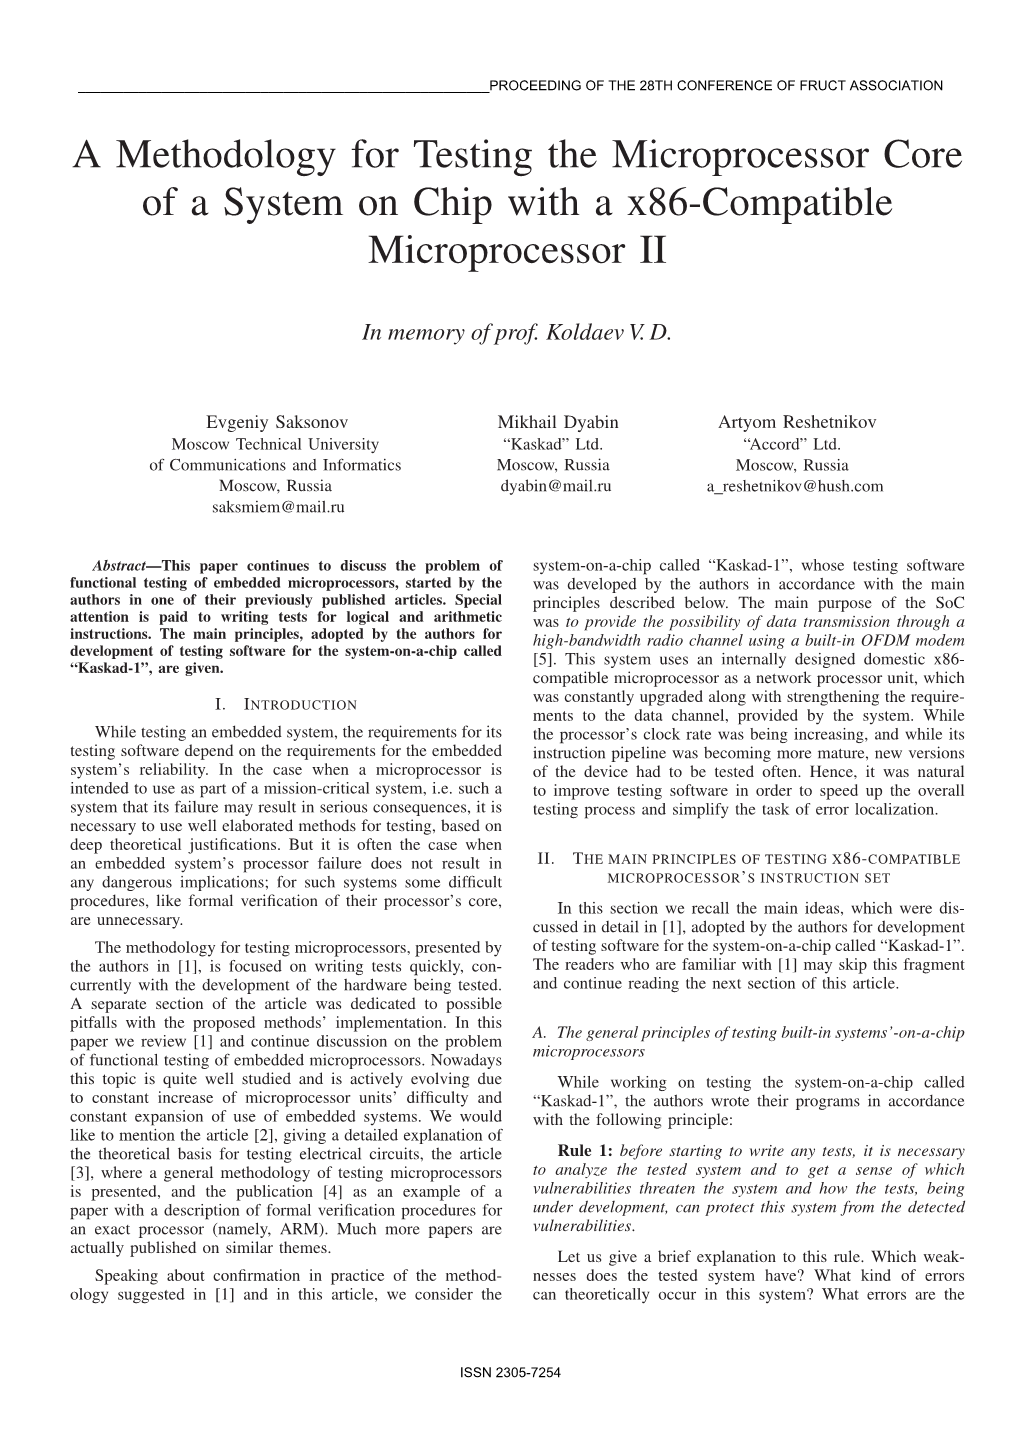 A Methodology for Testing the Microprocessor Core of a System on Chip with a X86-Compatible Microprocessor II